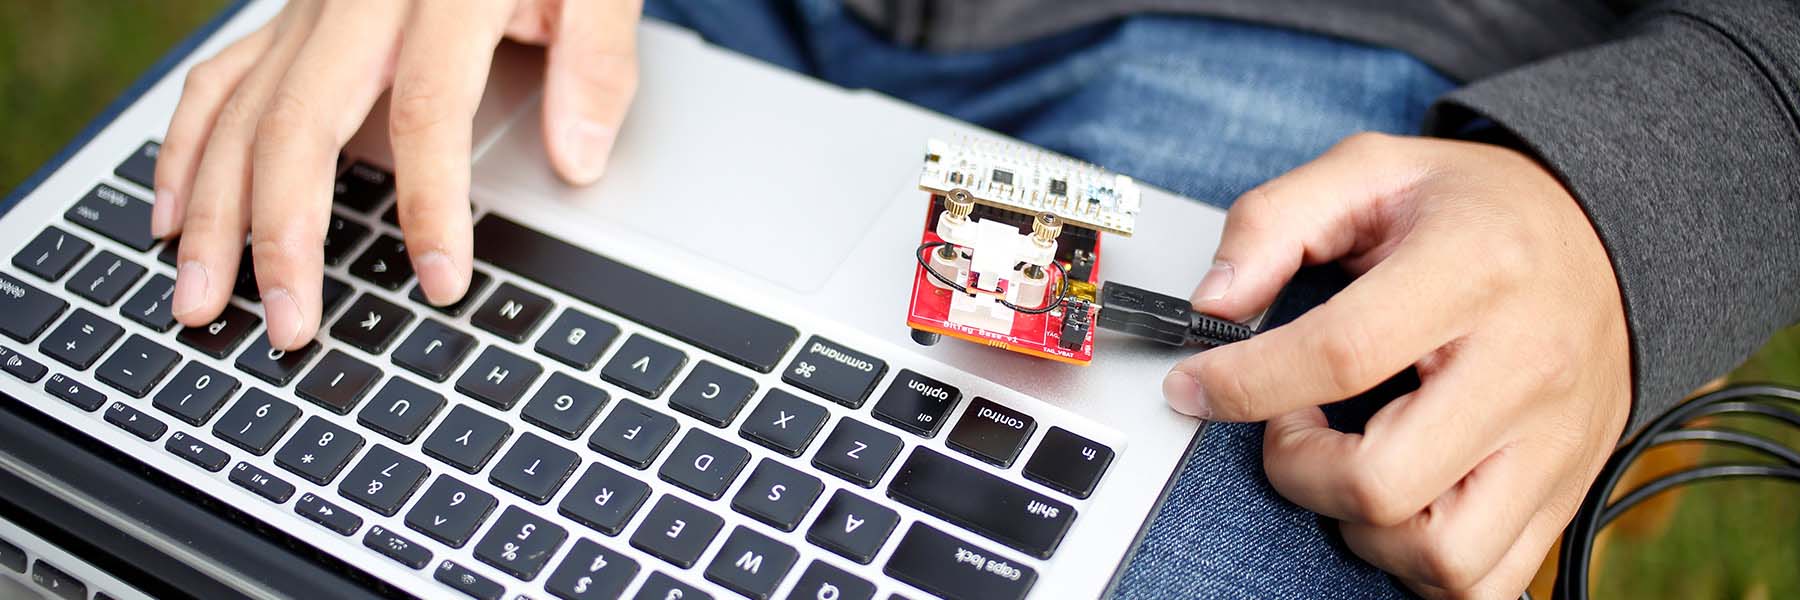 A close-up of a student's hands as they work with a circuit board, USB cable and a laptop